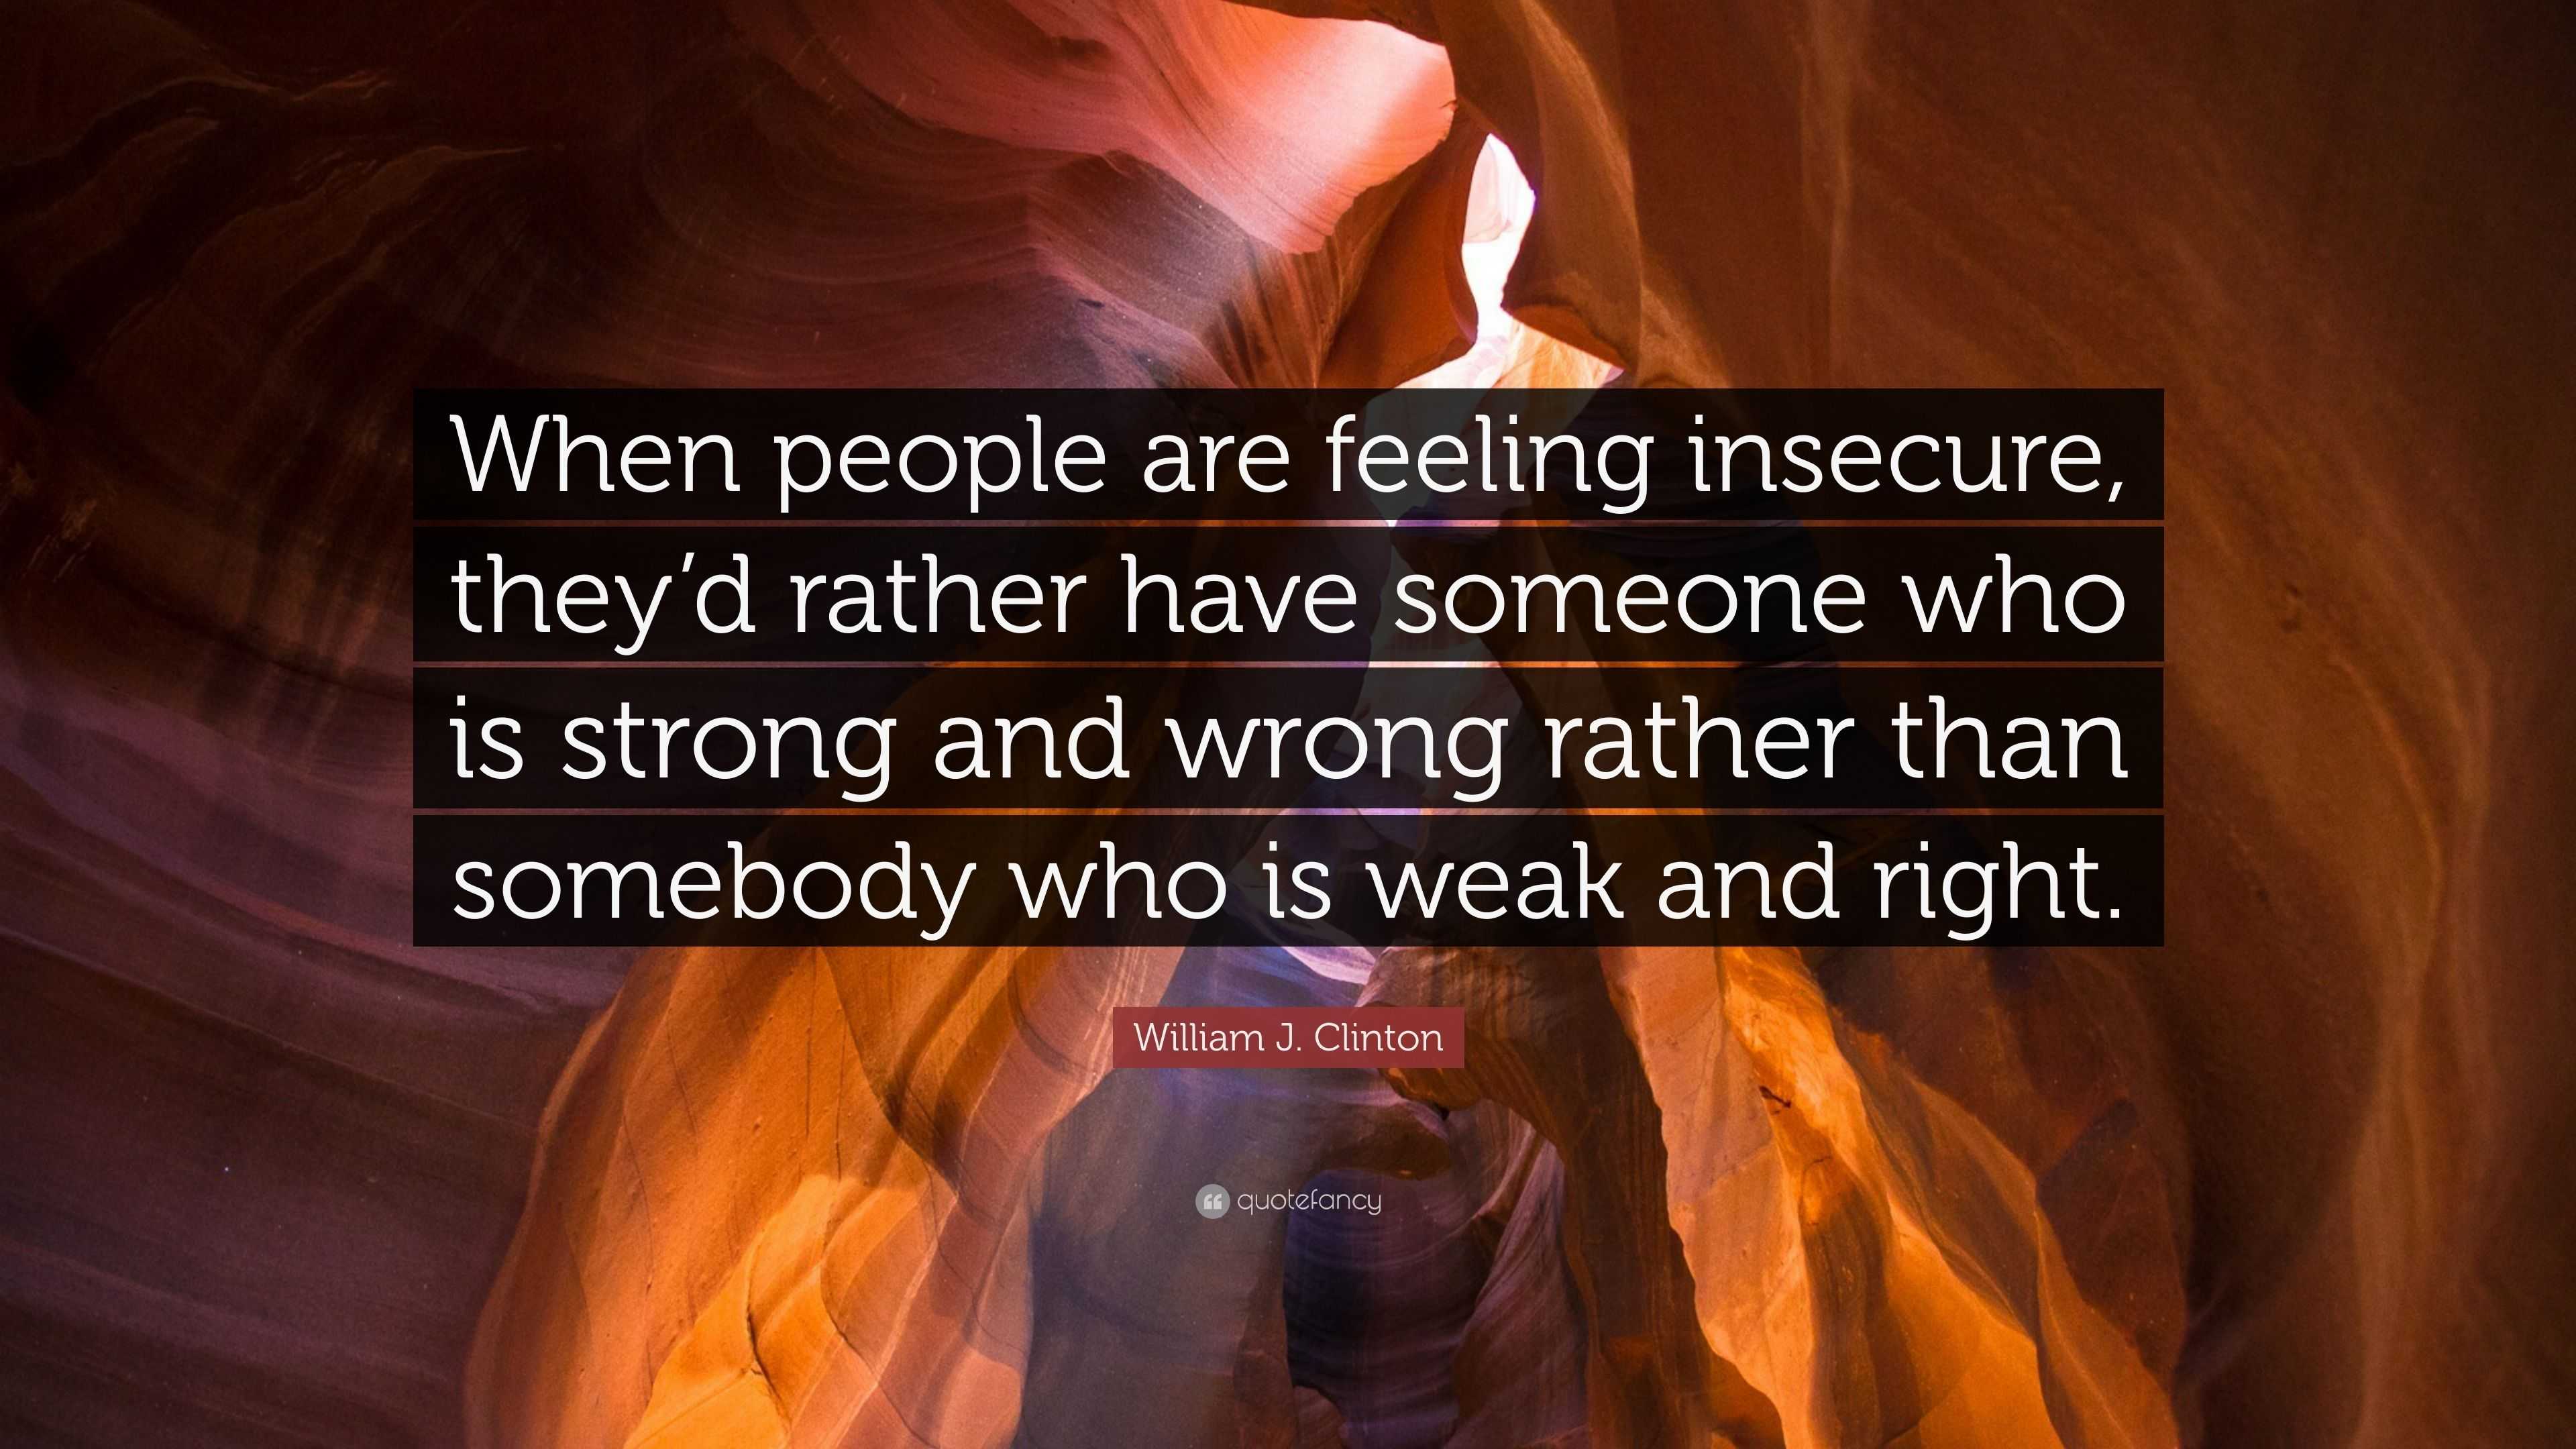 William J. Clinton Quote: "When people are feeling insecure, they'd ...